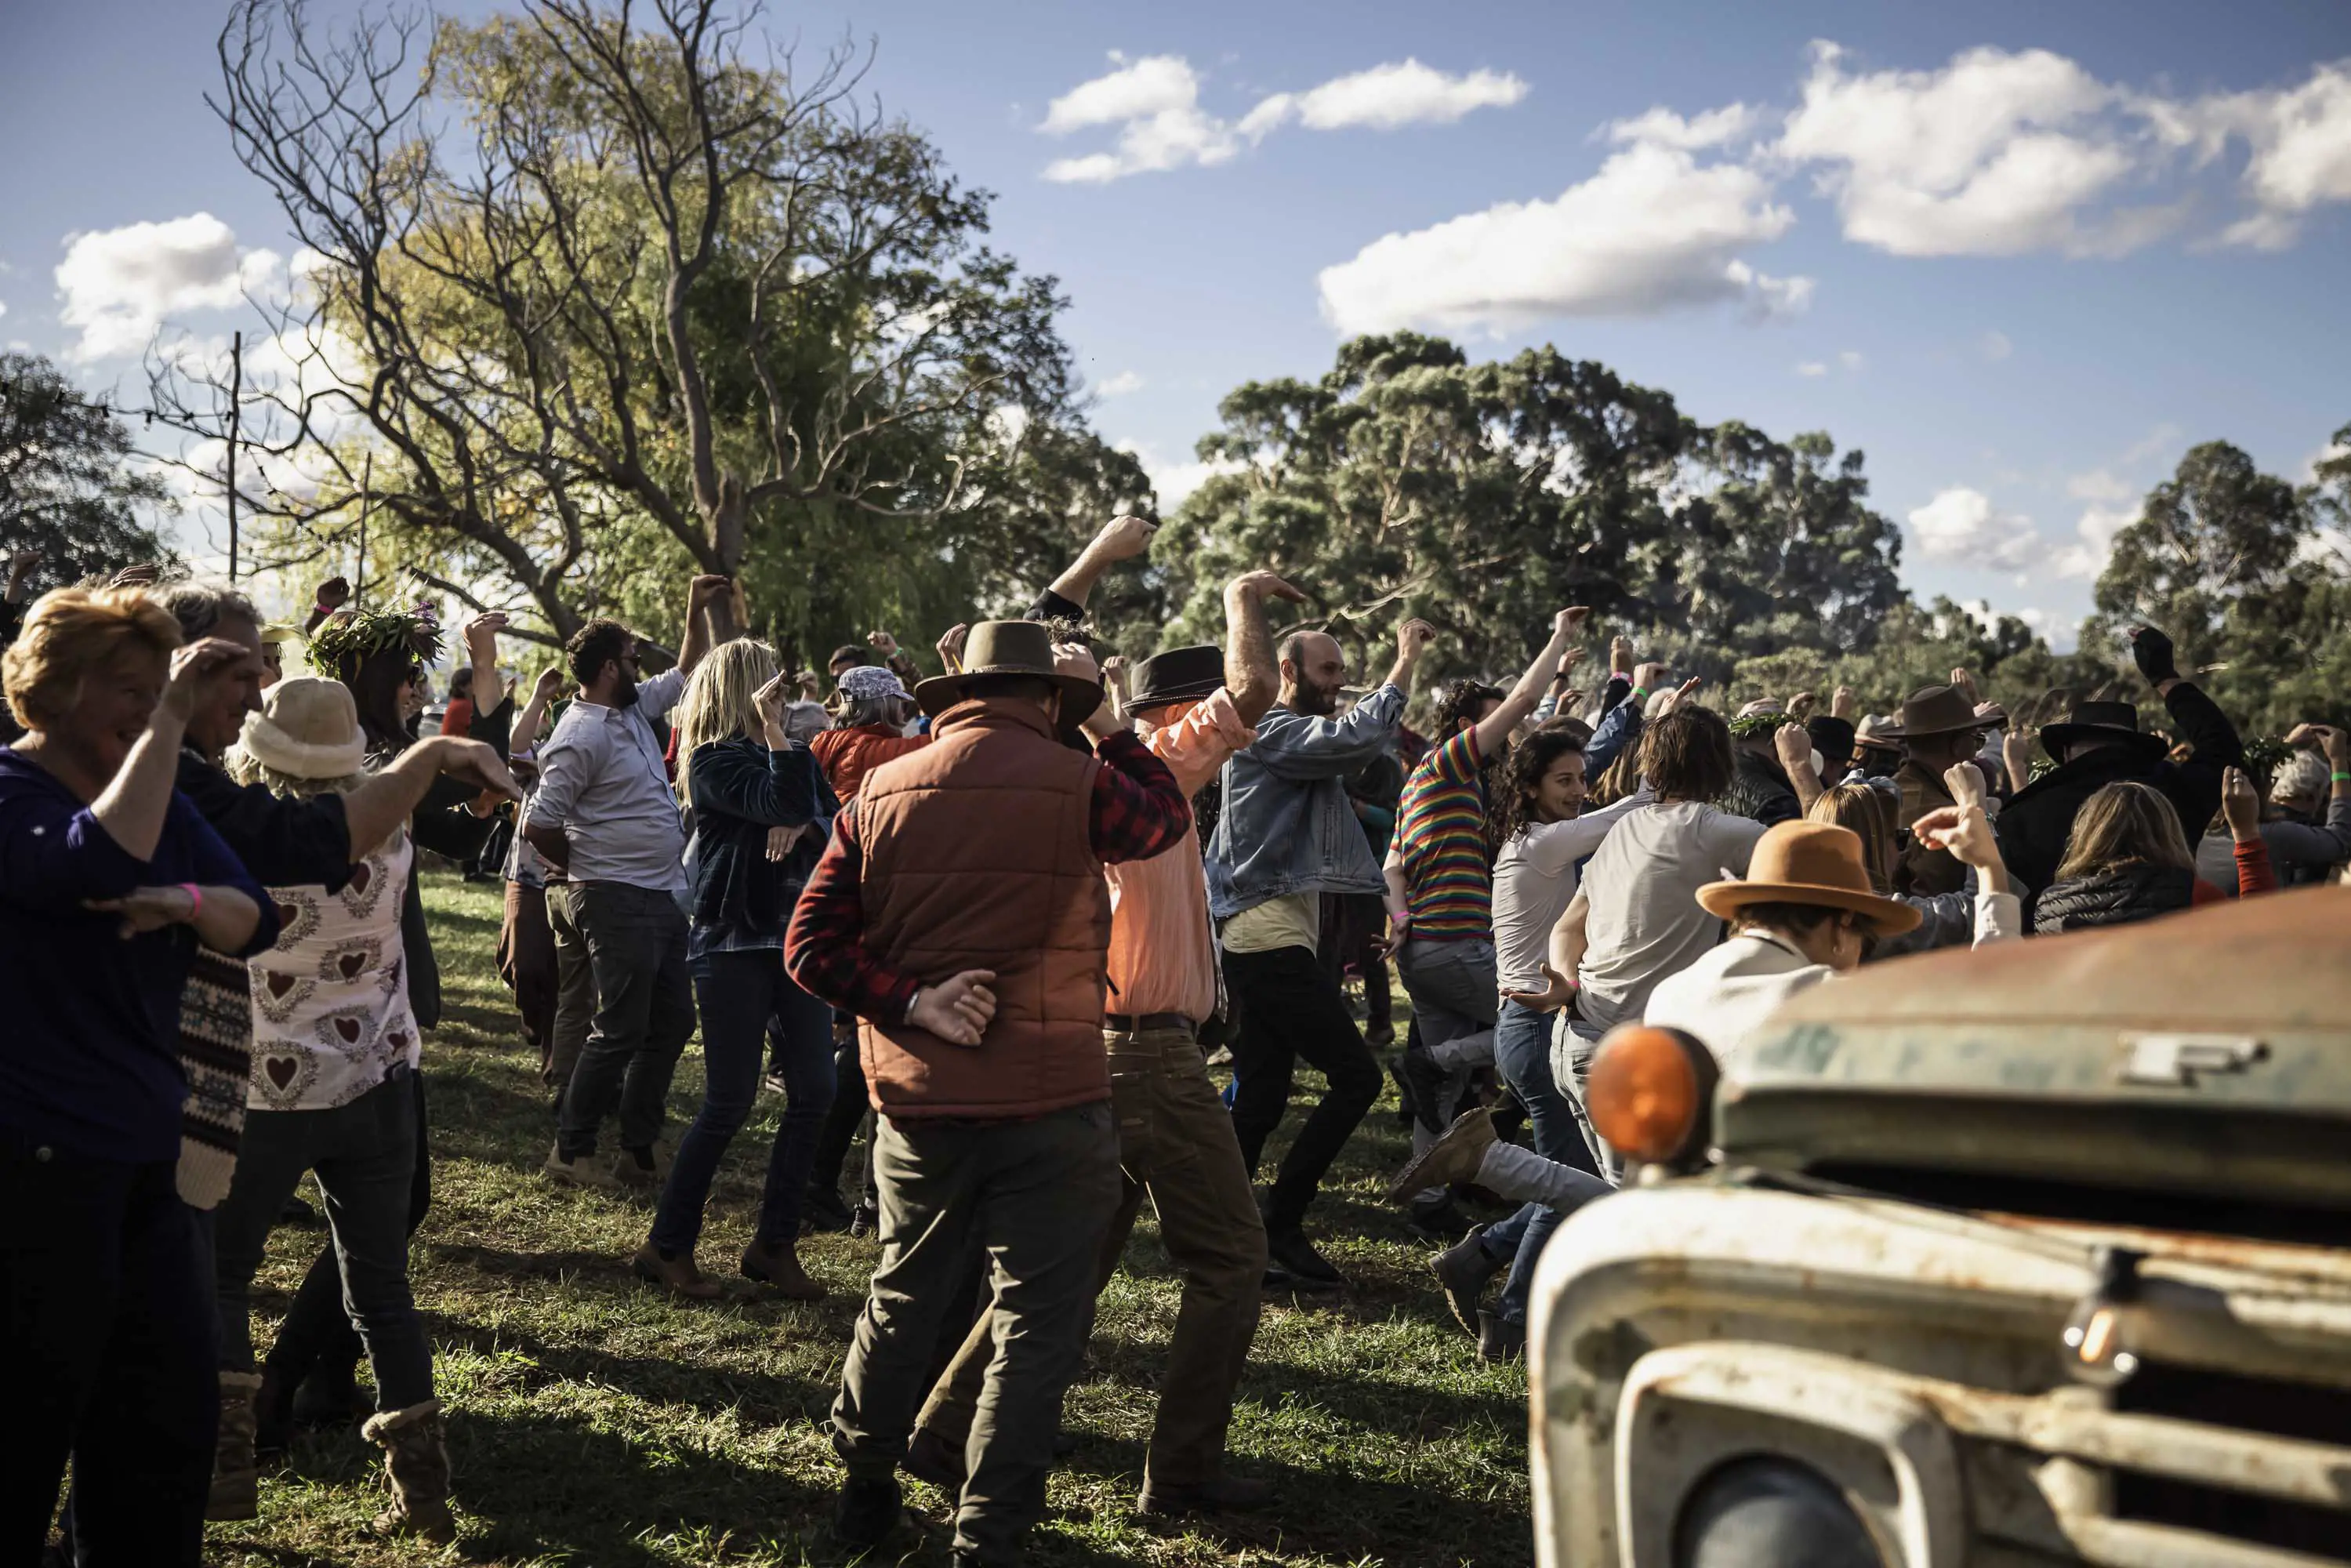 A group of people dance in a green paddock beneath trees on a clear, sunny day.